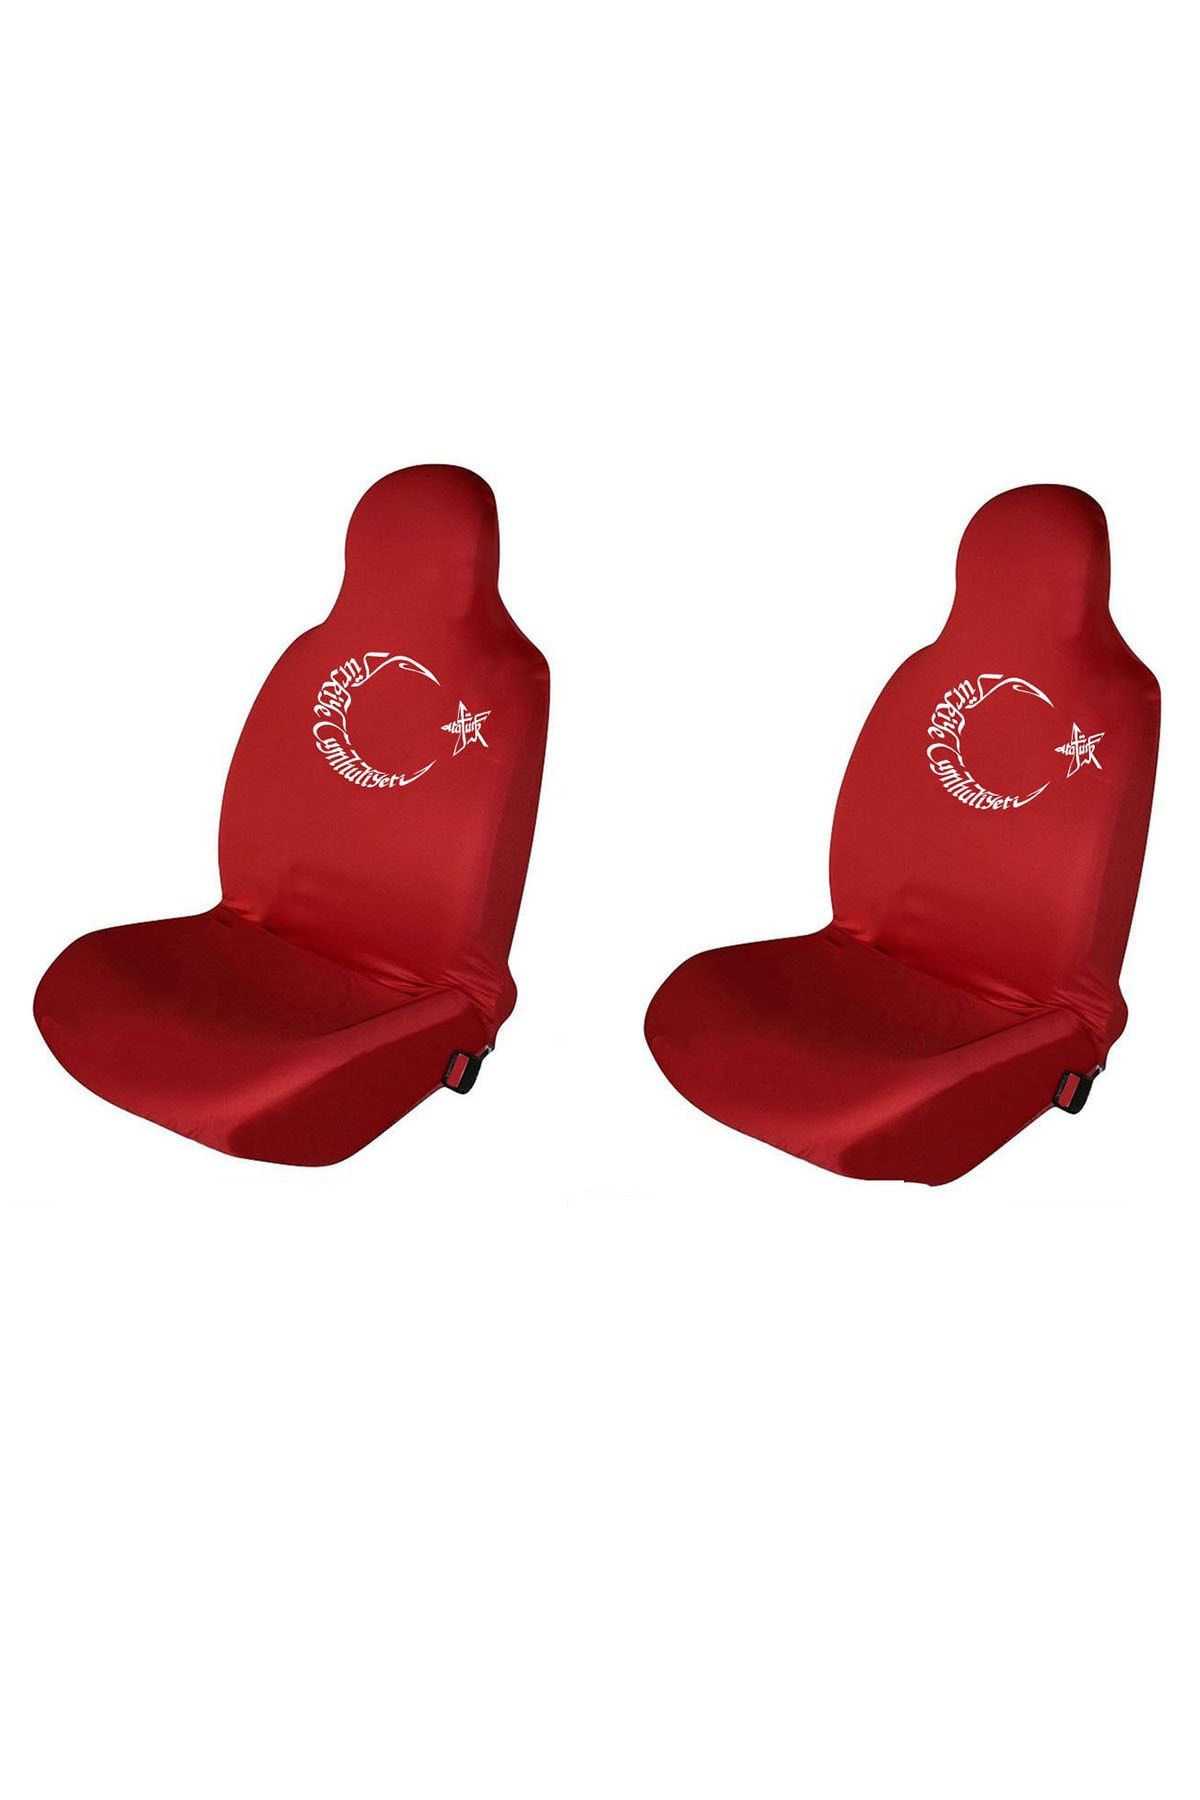 Özdemir Teks Mini Cooper Electric Car Seat Service Cover Flag Printed Front  Seats Red - Trendyol